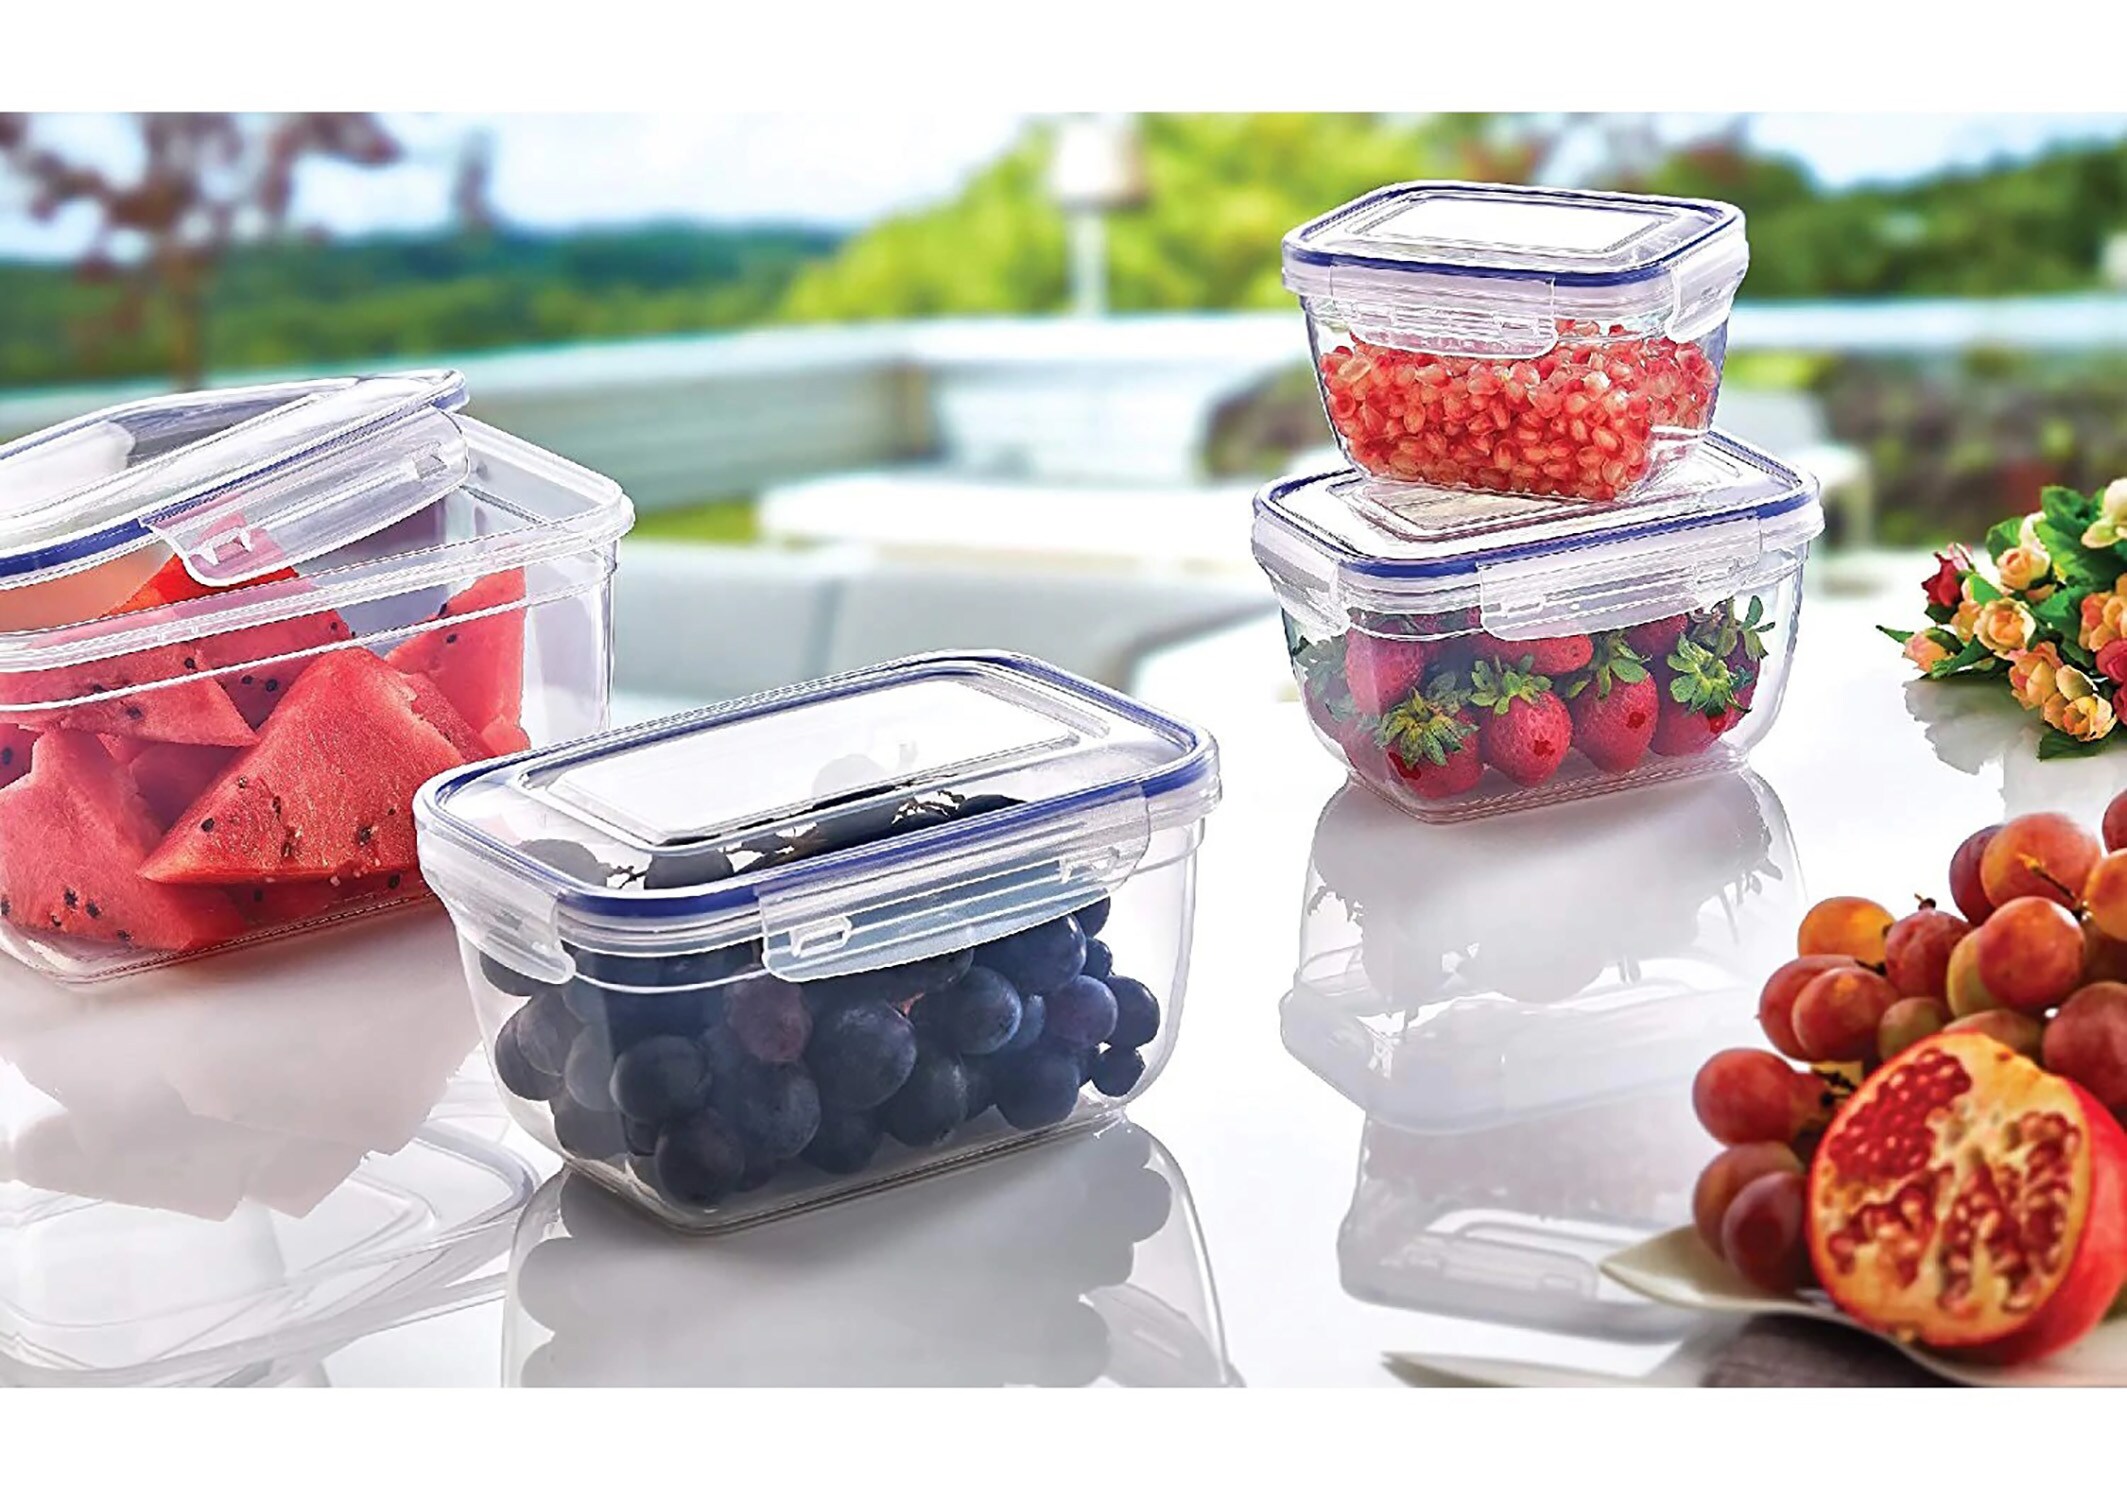 Glad 2-Pack Multisize Plastic Bpa-free Reusable Food Storage Container with  Lid in the Food Storage Containers department at